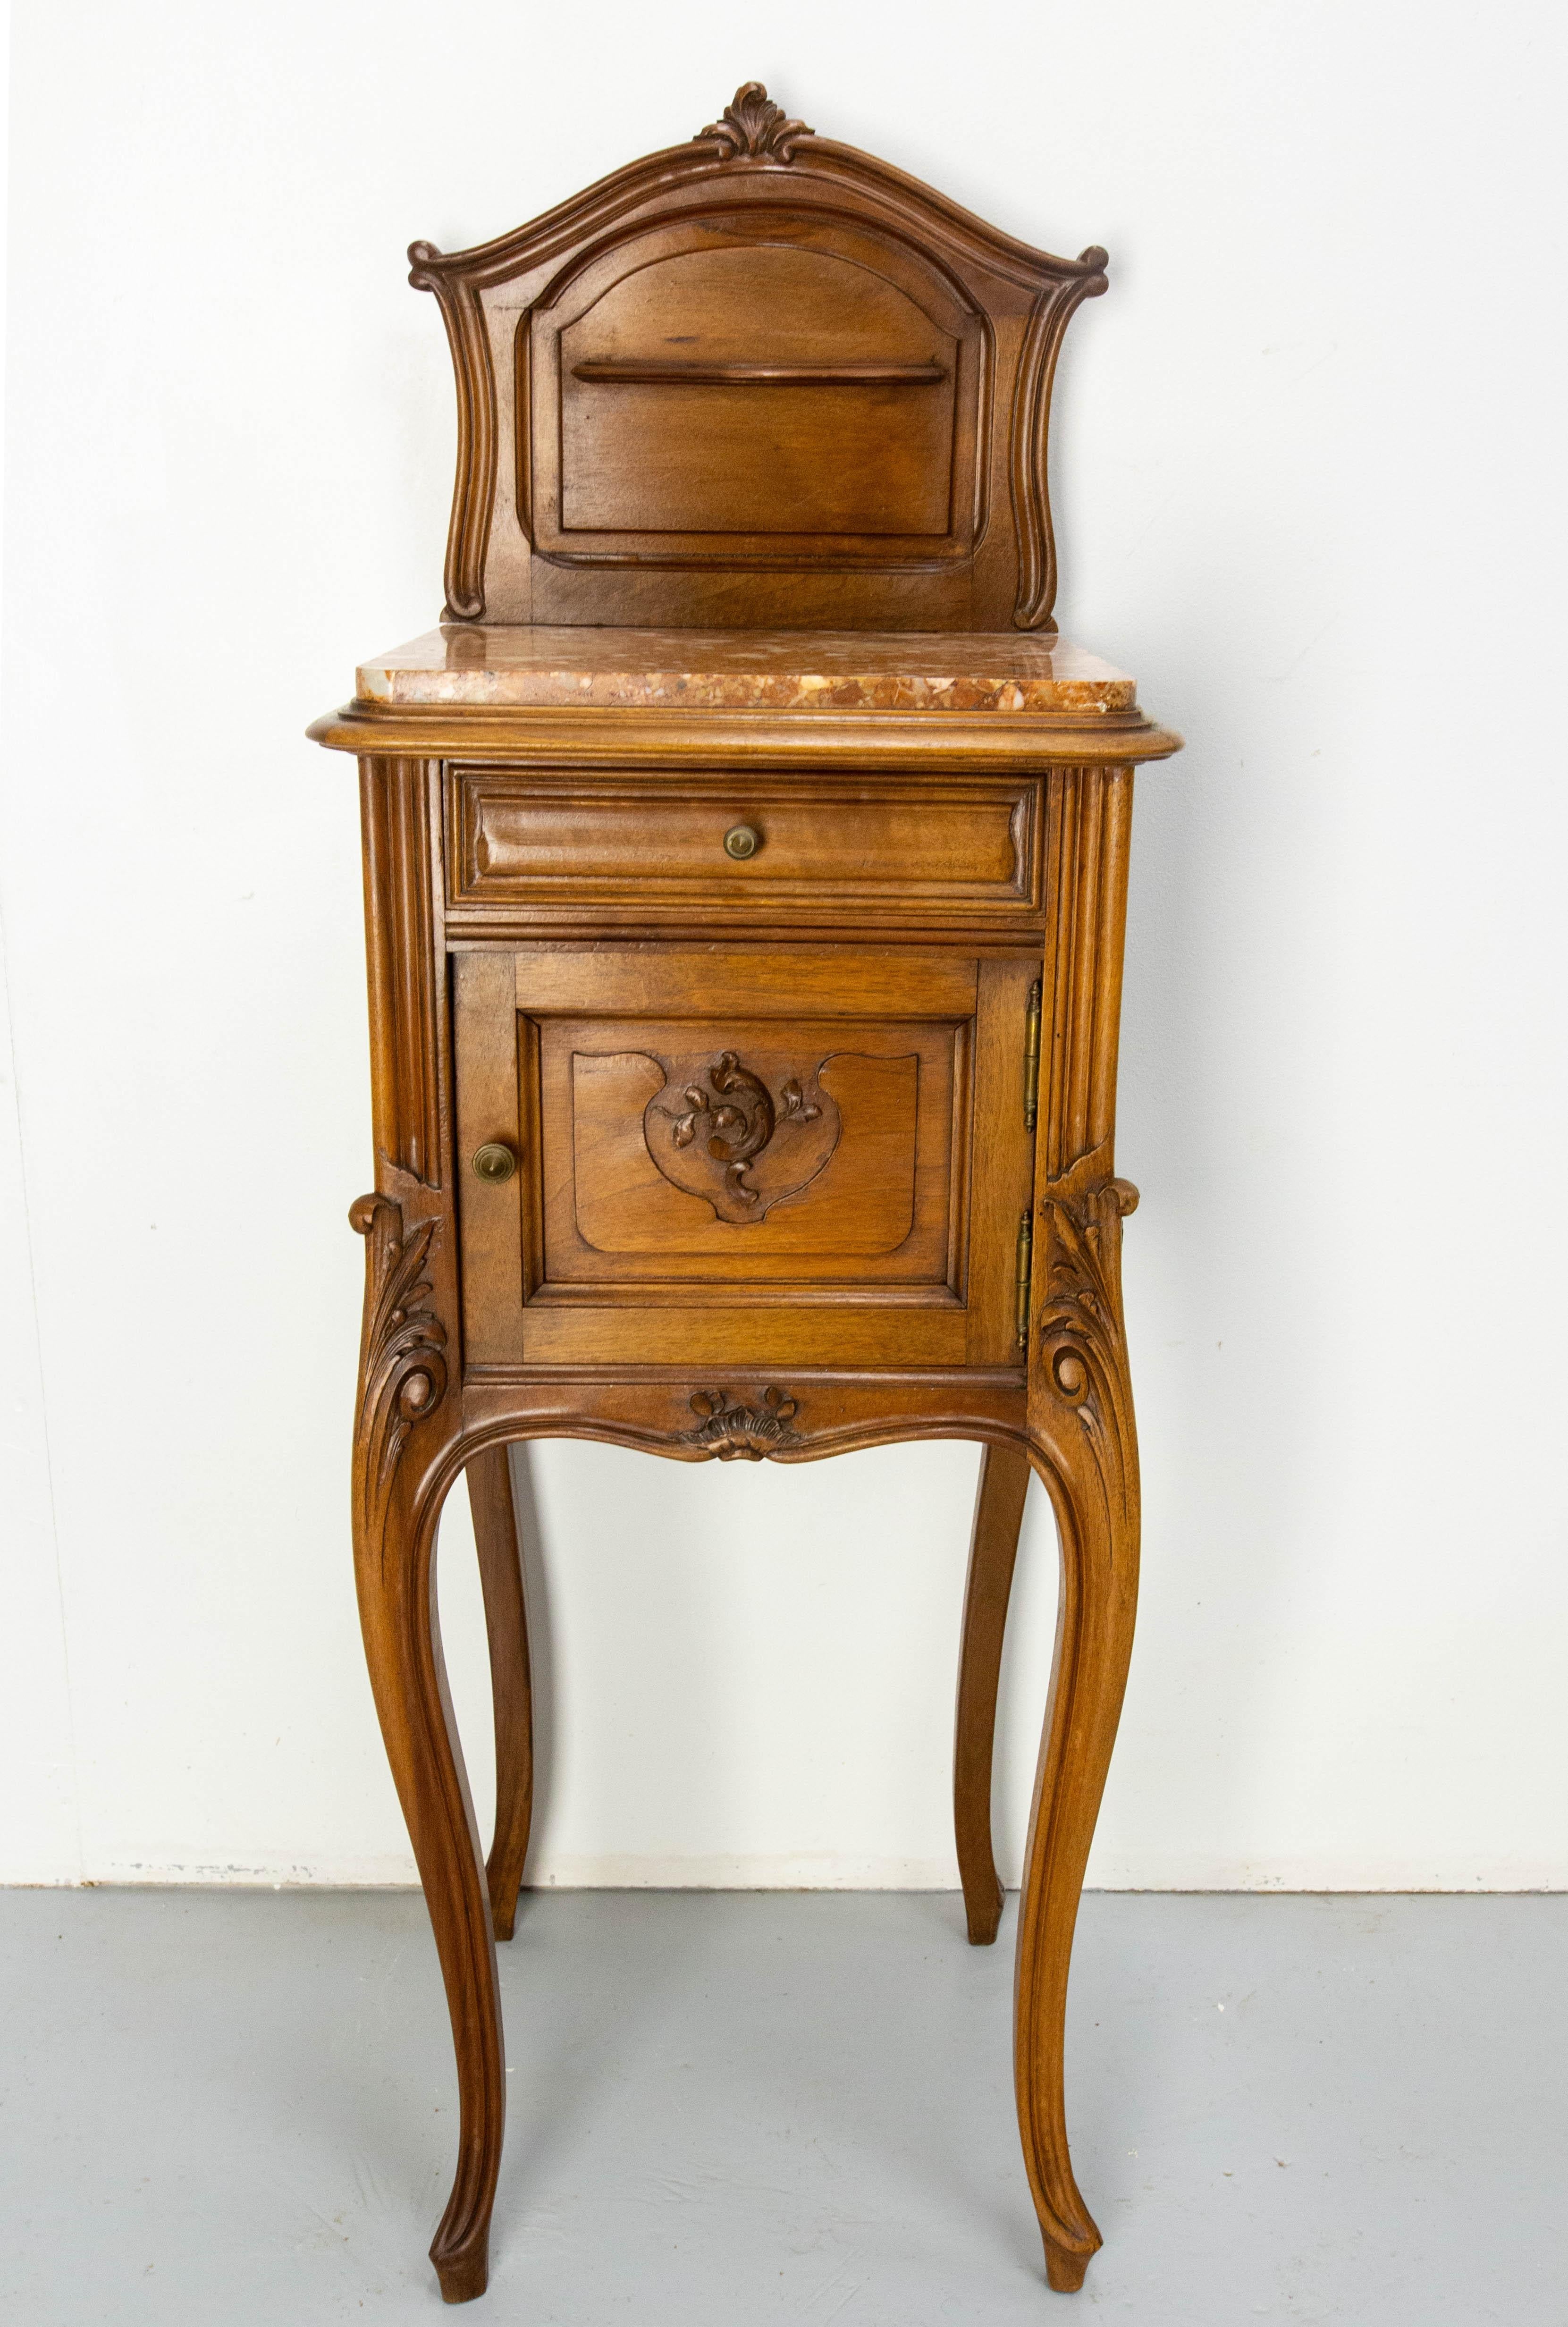 French side cabinet Louis XV style nightstand
20th Mid-century
Massive walnut bedside table with ornement of vegetal inspiration
One drawer and one trapdoor with porcelain interior.
Height to marble 88 cm/35 in
Very good